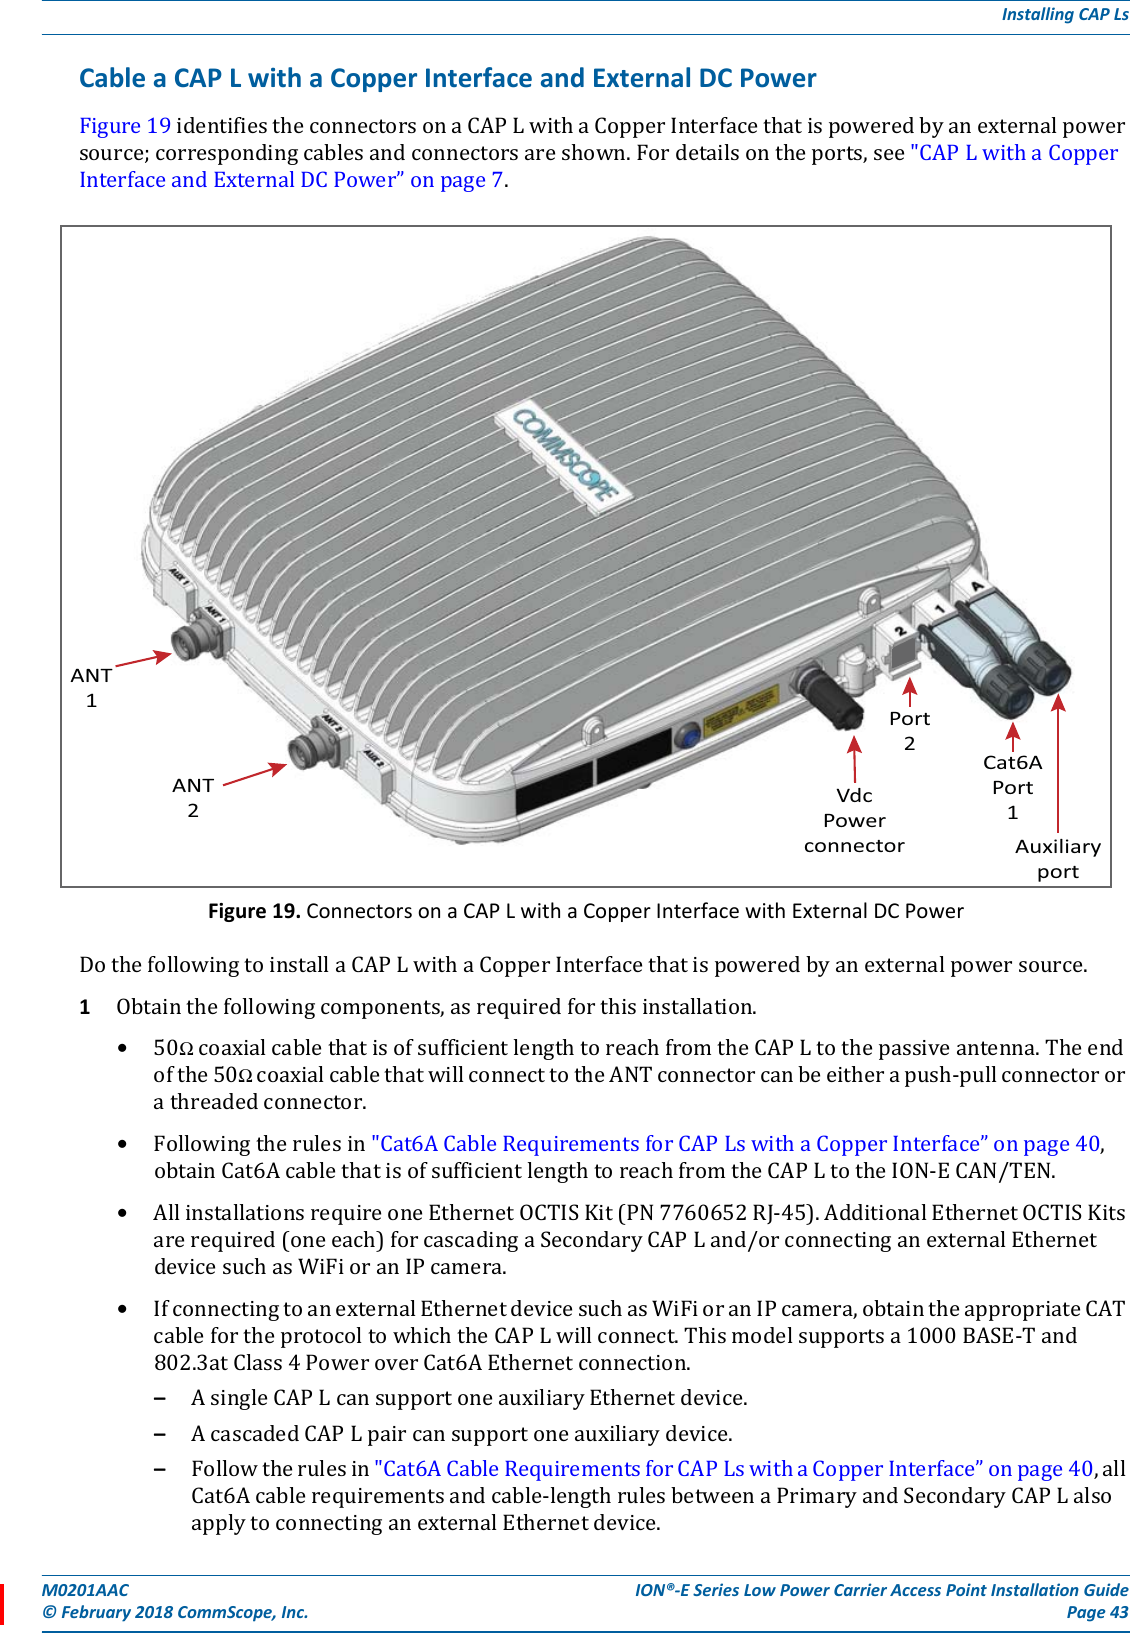 M0201AAC ION®-E Series Low Power Carrier Access Point Installation Guide© February 2018 CommScope, Inc. Page 43Installing CAP LsCable a CAP L with a Copper Interface and External DC PowerFigure19identifiestheconnectorsonaCAPLwithaCopperInterfacethatispoweredbyanexternalpowersource;correspondingcablesandconnectorsareshown.Fordetailsontheports,see&quot;CAPLwithaCopperInterfaceandExternalDCPower”onpage7.Figure 19. Connectors on a CAP L with a Copper Interface with External DC PowerDothefollowingtoinstallaCAPLwithaCopperInterfacethatispoweredbyanexternalpowersource.1Obtainthefollowingcomponents,asrequiredforthisinstallation.•50ΩcoaxialcablethatisofsufficientlengthtoreachfromtheCAPLtothepassiveantenna.Theendofthe50ΩcoaxialcablethatwillconnecttotheANTconnectorcanbeeitherapush-pullconnectororathreadedconnector.•Followingtherulesin&quot;Cat6ACableRequirementsforCAPLswithaCopperInterface”onpage40,obtainCat6AcablethatisofsufficientlengthtoreachfromtheCAPLtotheION-ECAN/TEN.•AllinstallationsrequireoneEthernetOCTISKit(PN7760652RJ-45).AdditionalEthernetOCTISKitsarerequired(oneeach)forcascadingaSecondaryCAPLand/orconnectinganexternalEthernetdevicesuchasWiFioranIPcamera.•IfconnectingtoanexternalEthernetdevicesuchasWiFioranIPcamera,obtaintheappropriateCATcablefortheprotocoltowhichtheCAPLwillconnect.Thismodelsupportsa1000BASE-Tand802.3atClass4PoweroverCat6AEthernetconnection.–AsingleCAPLcansupportoneauxiliaryEthernetdevice.–AcascadedCAPLpaircansupportoneauxiliarydevice.–Followtherulesin&quot;Cat6ACableRequirementsforCAPLswithaCopperInterface”onpage40,allCat6Acablerequirementsandcable-lengthrulesbetweenaPrimaryandSecondaryCAPLalsoapplytoconnectinganexternalEthernetdevice.ANT1ANT2VdcPowerconnectorCat6APort1AuxiliaryportPort2